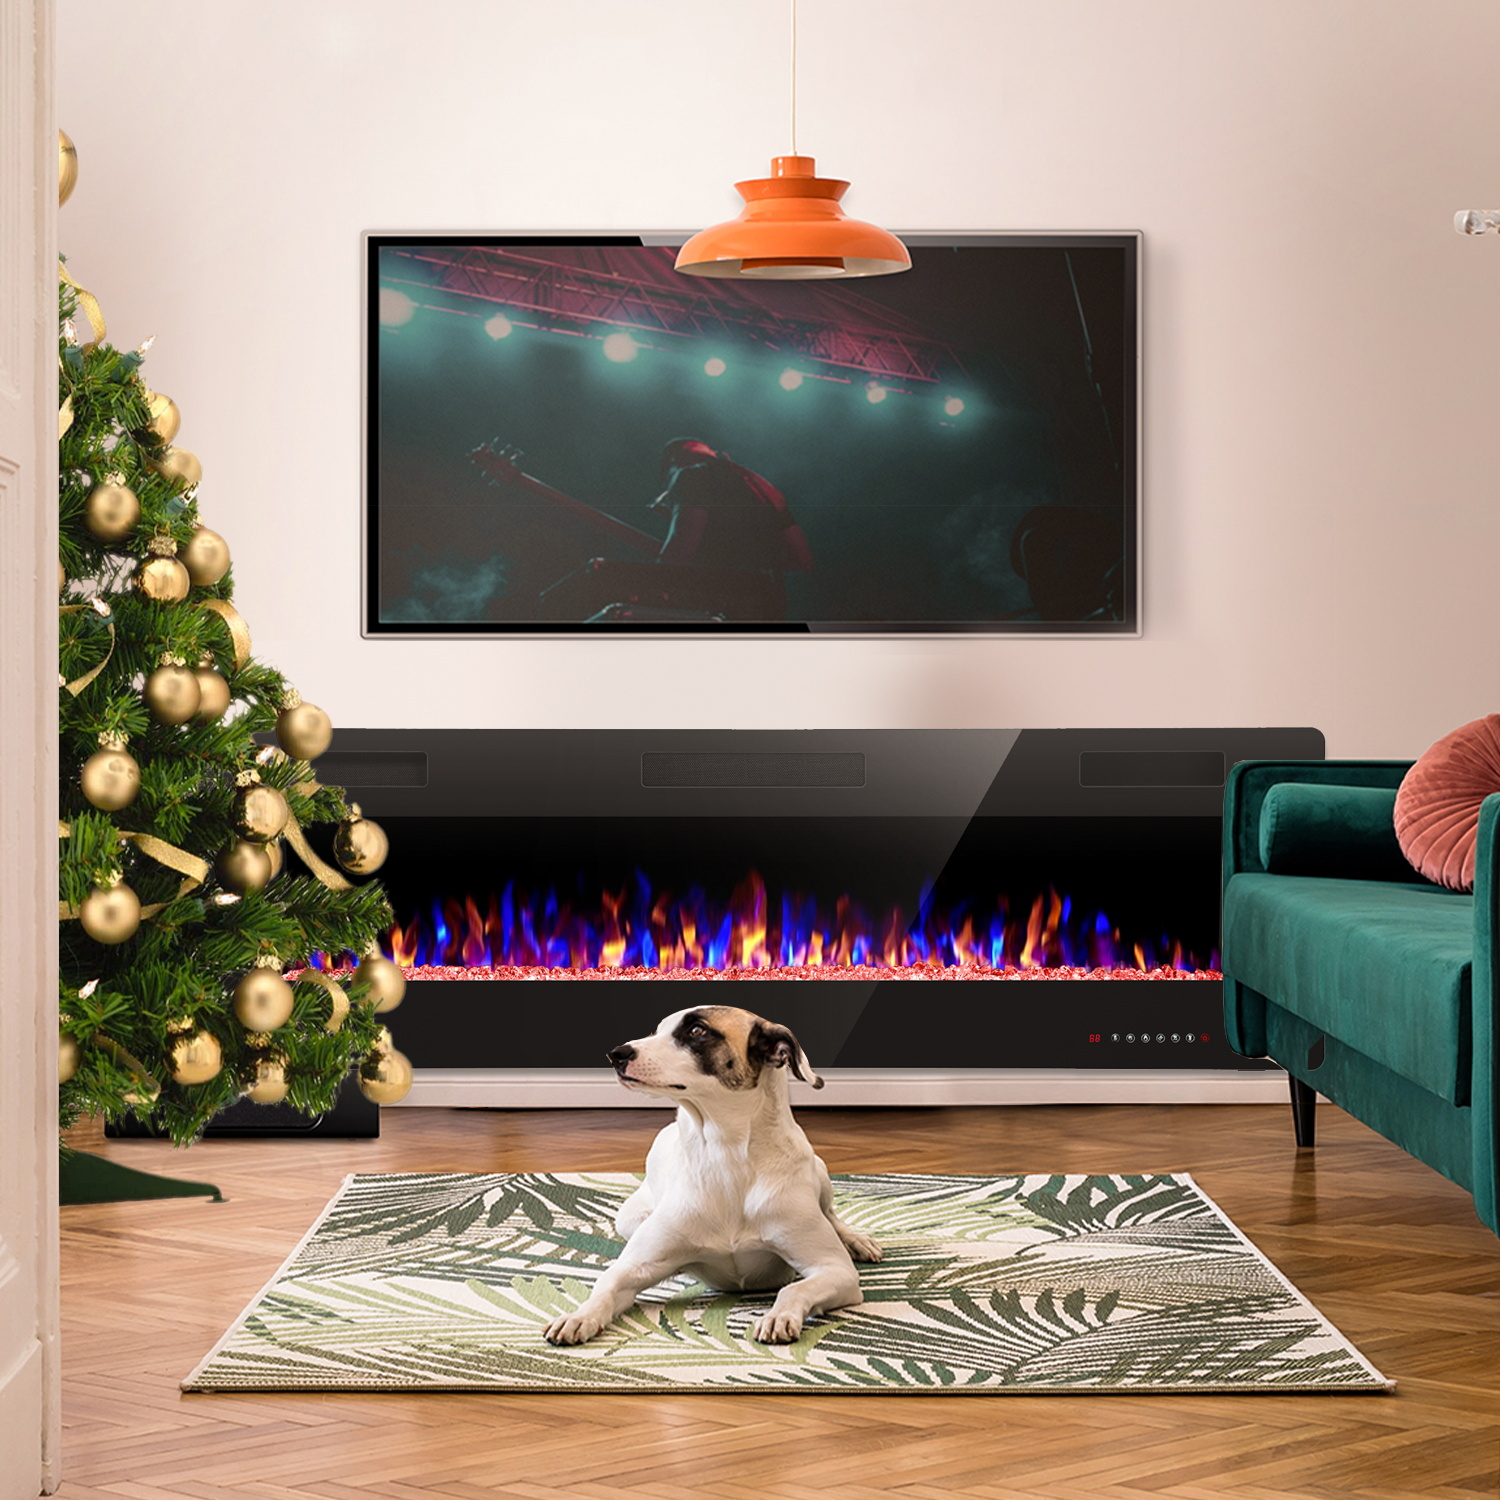 Where to Install an Electric Fireplace?